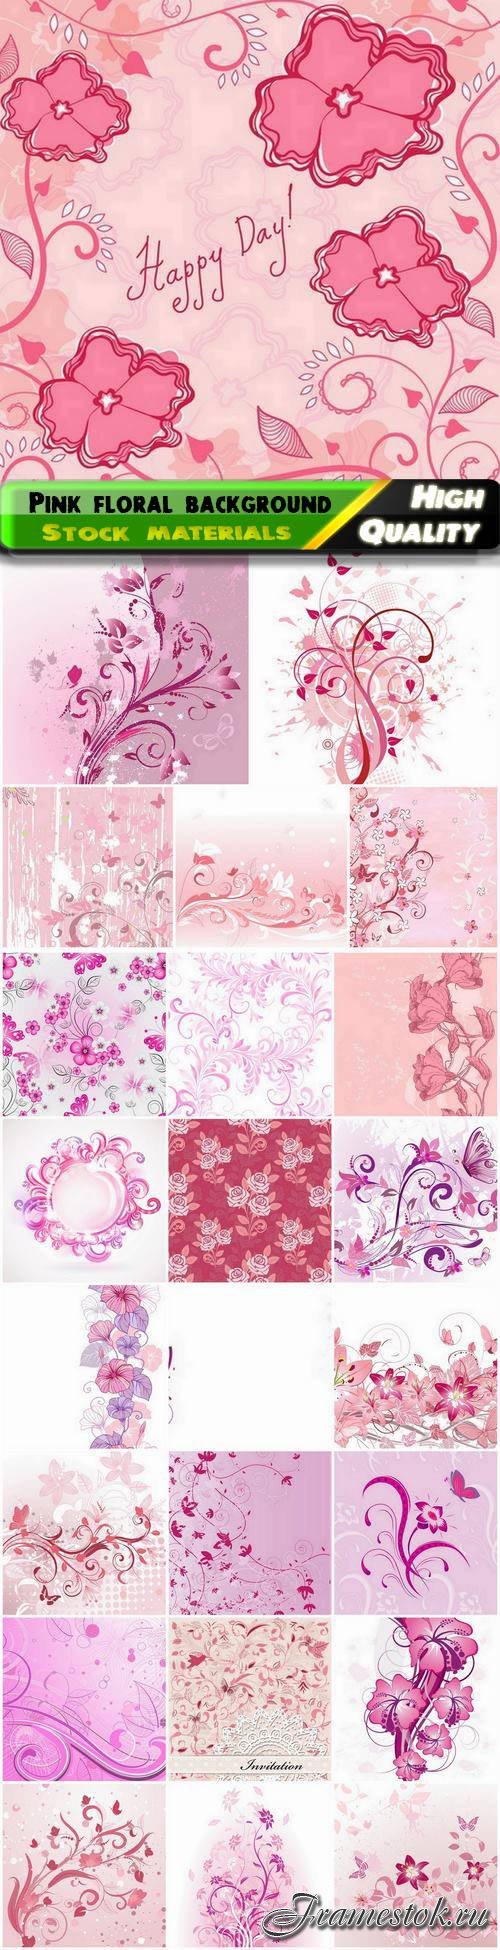 Abstract cute pink floral background with flowers and leaves 25 Eps